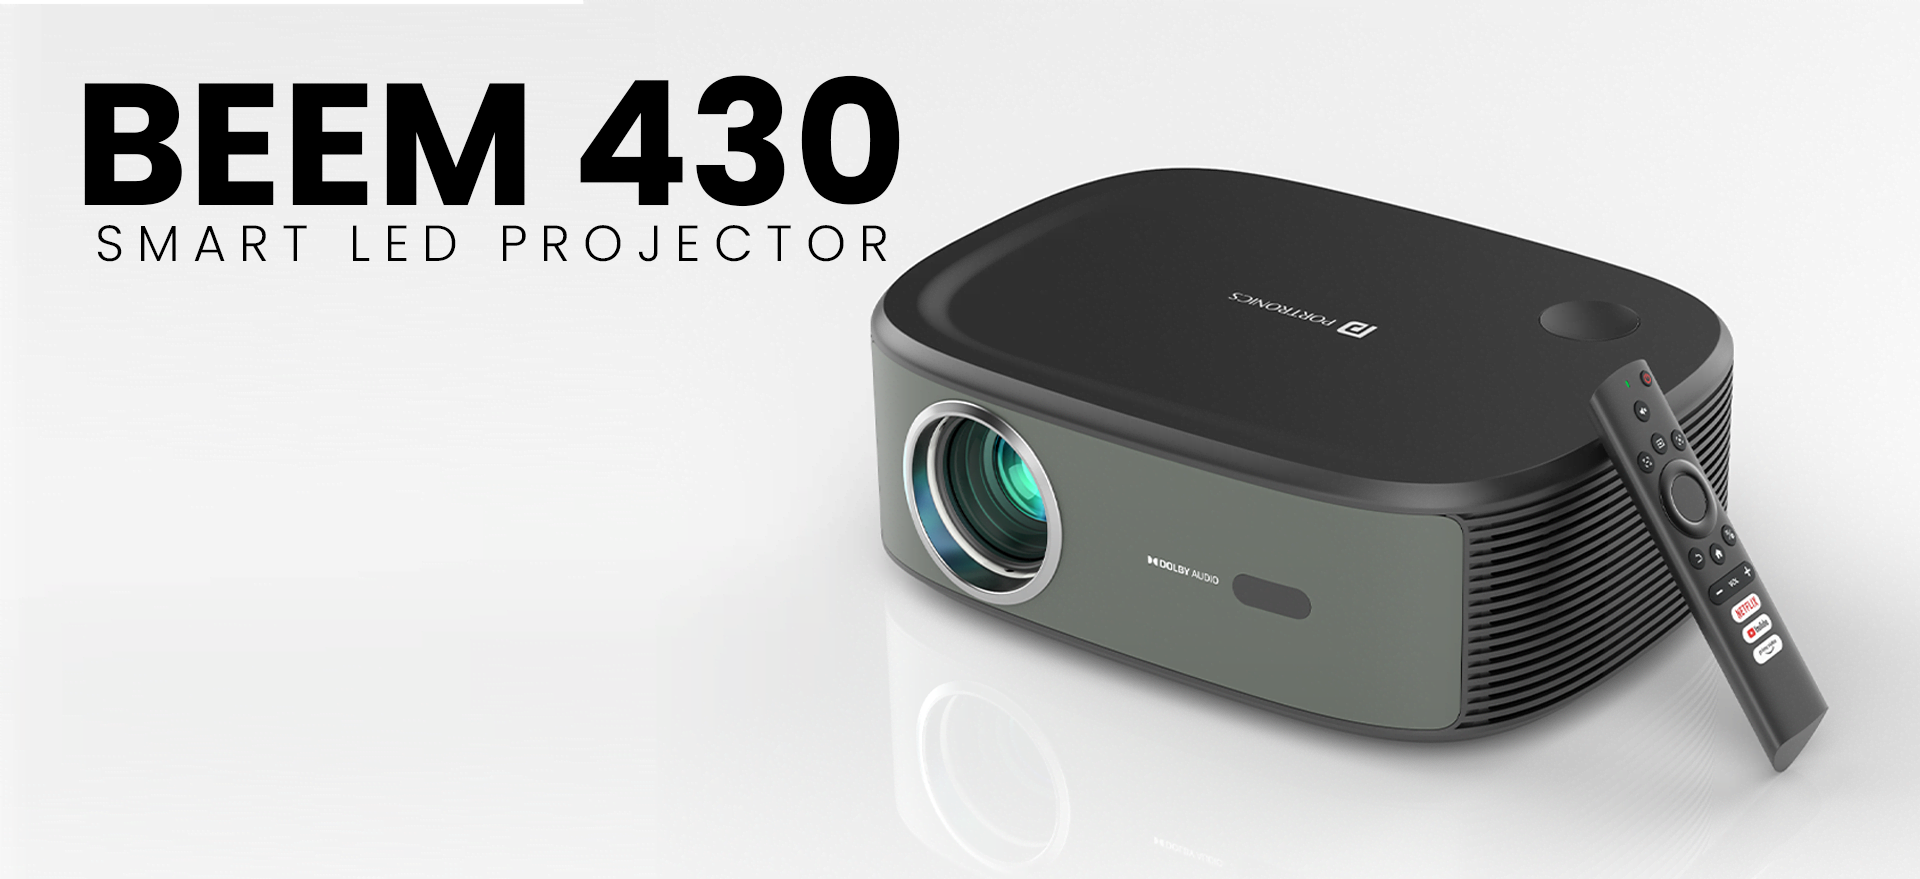 Portronics Unveils Beem 430 Smart LED Projector for Enhanced Visual Experiences